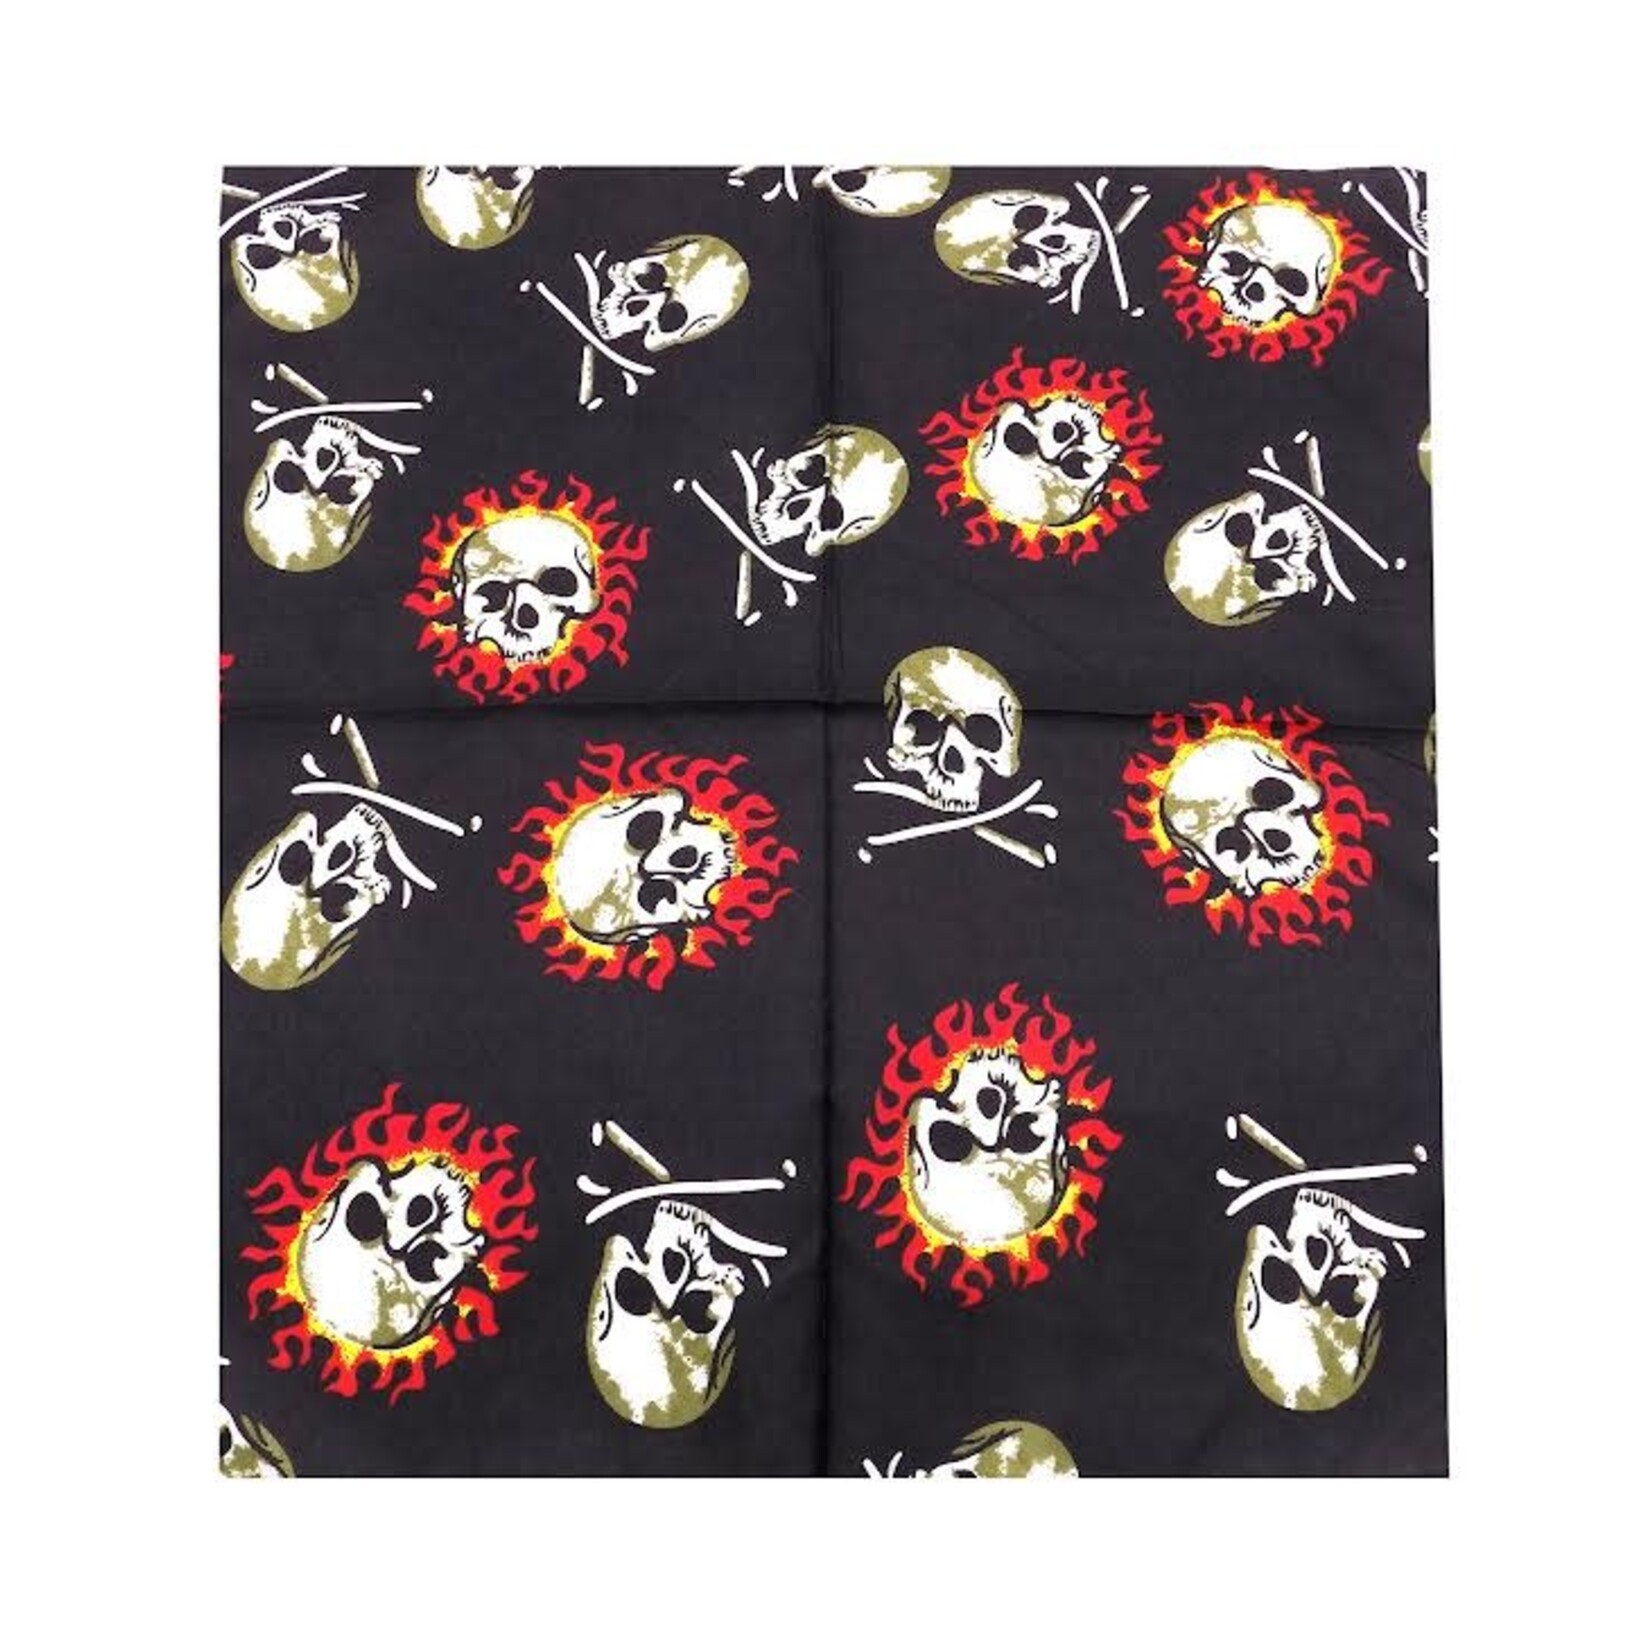 Bandana Patterned  Skull With Flames